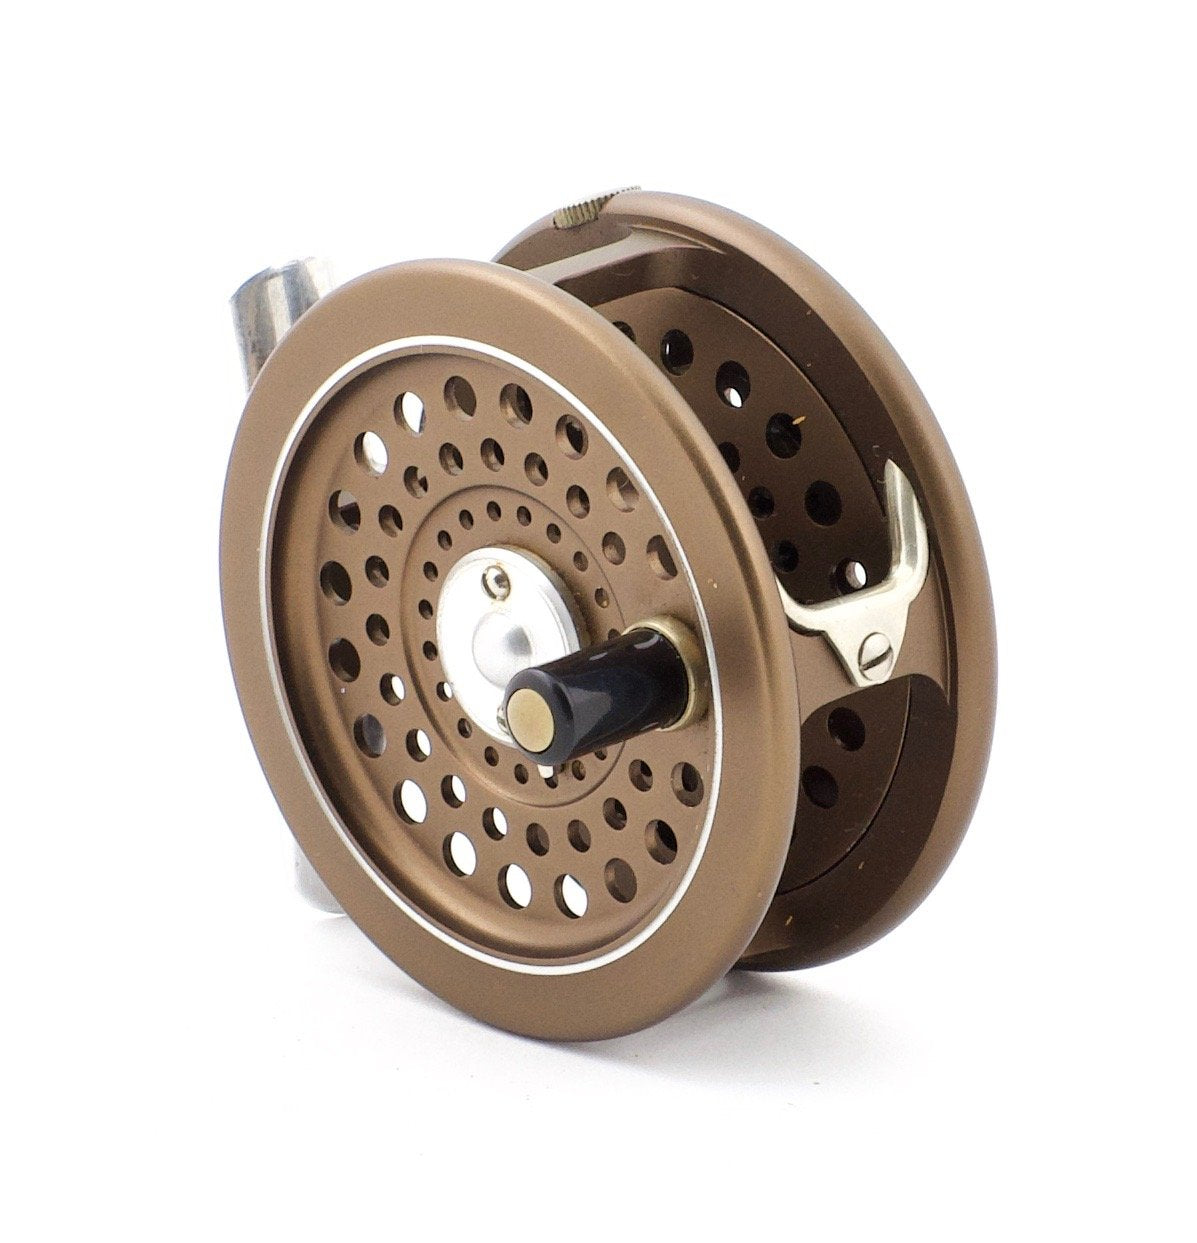 Sage 503L fly reel and spare spool (made by Hardy) - Spinoza Rod Company